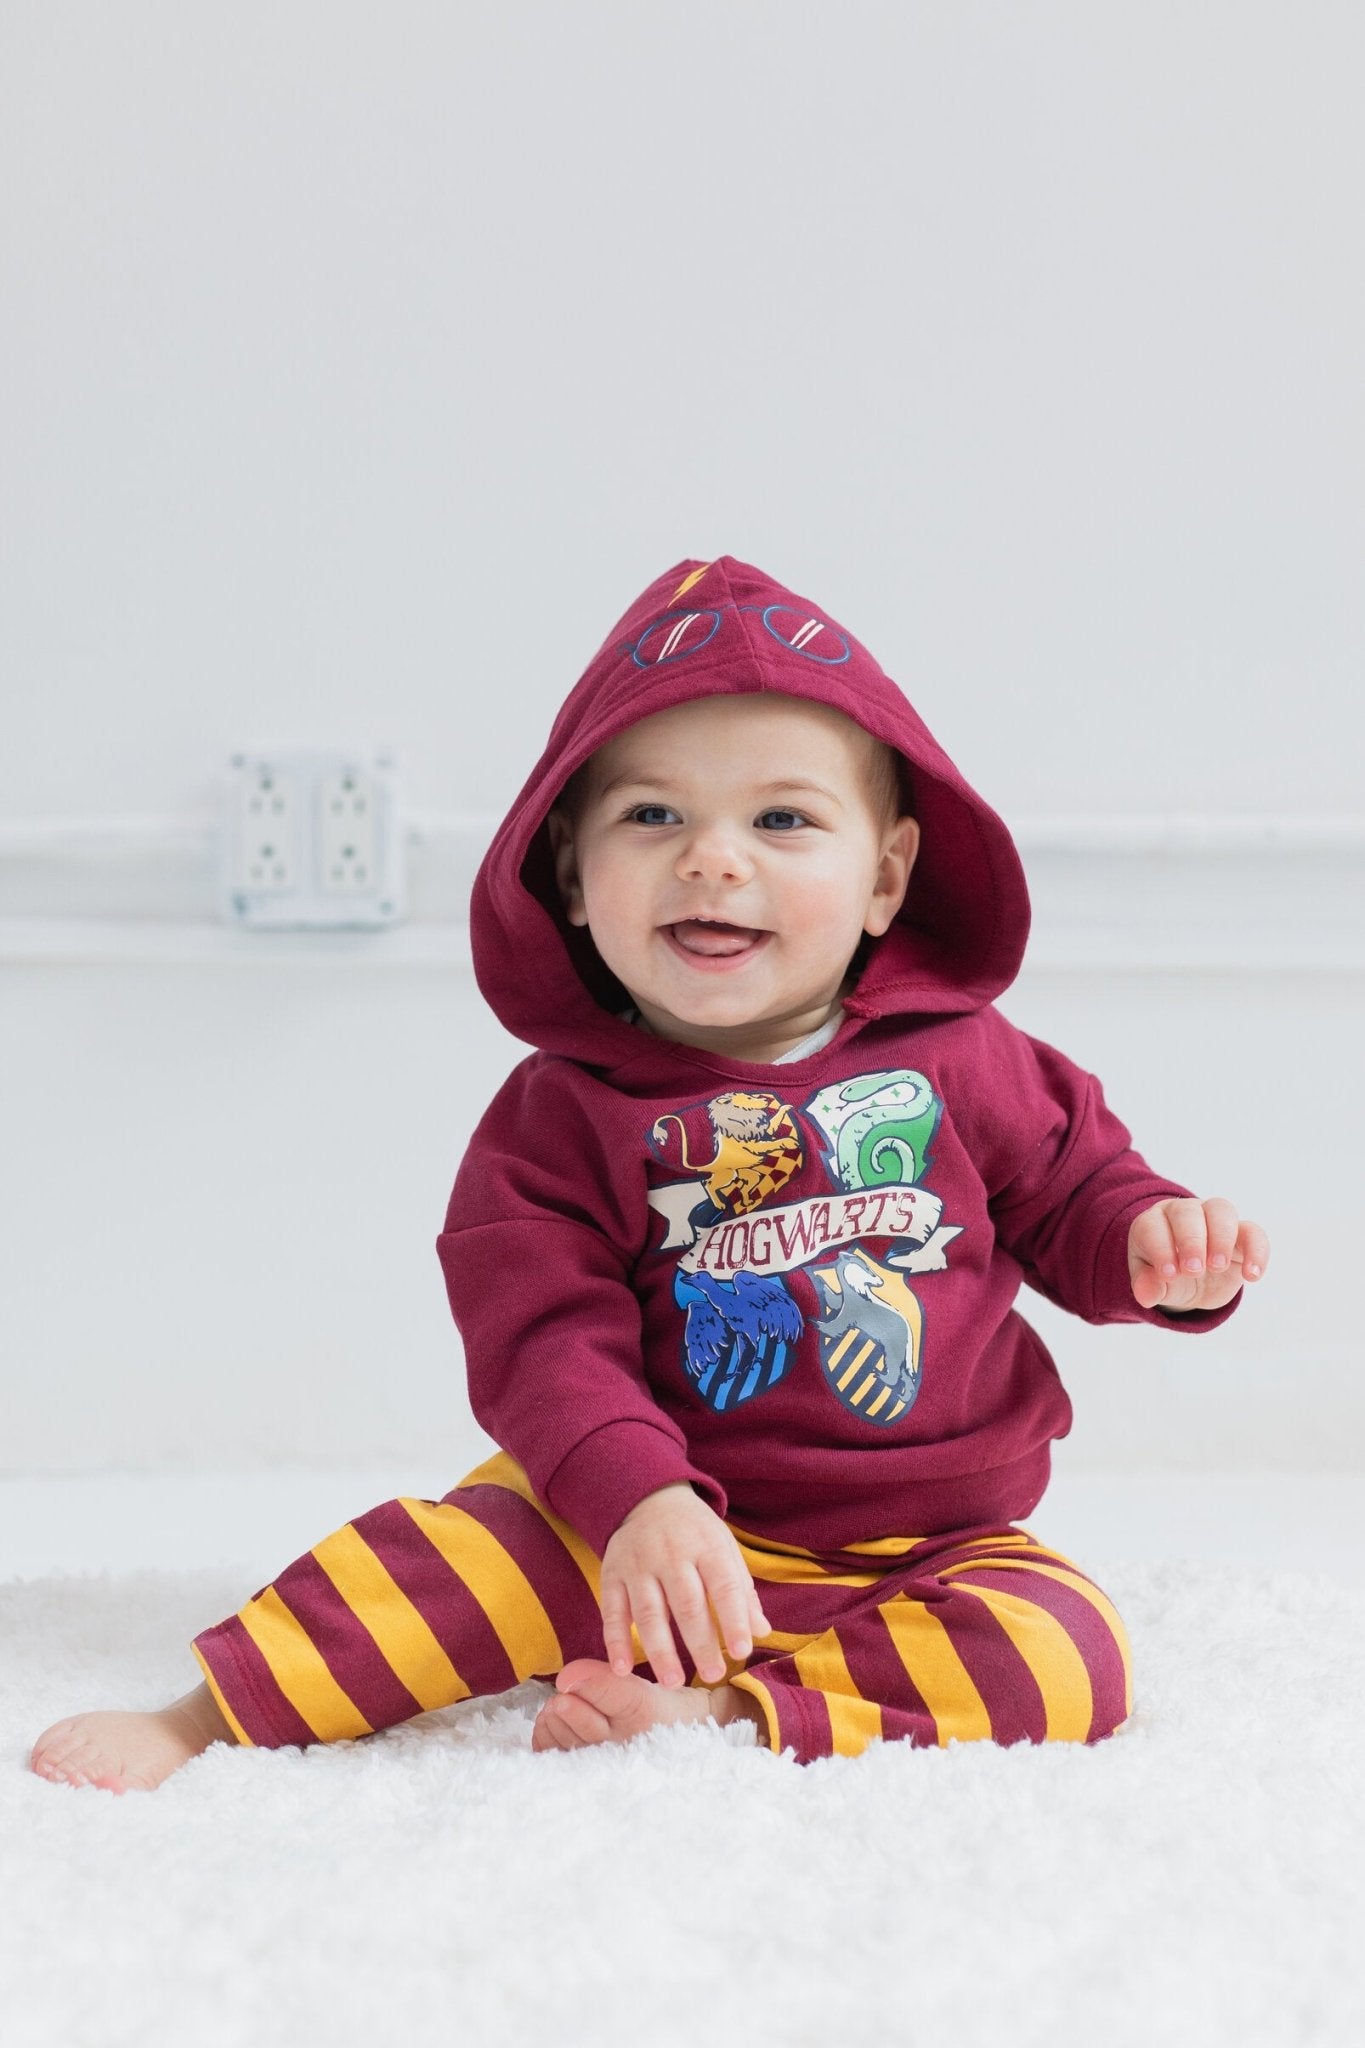 Harry Potter Fleece Pullover Hoodie Bodysuit and Pants 3 Piece Outfit Set - imagikids